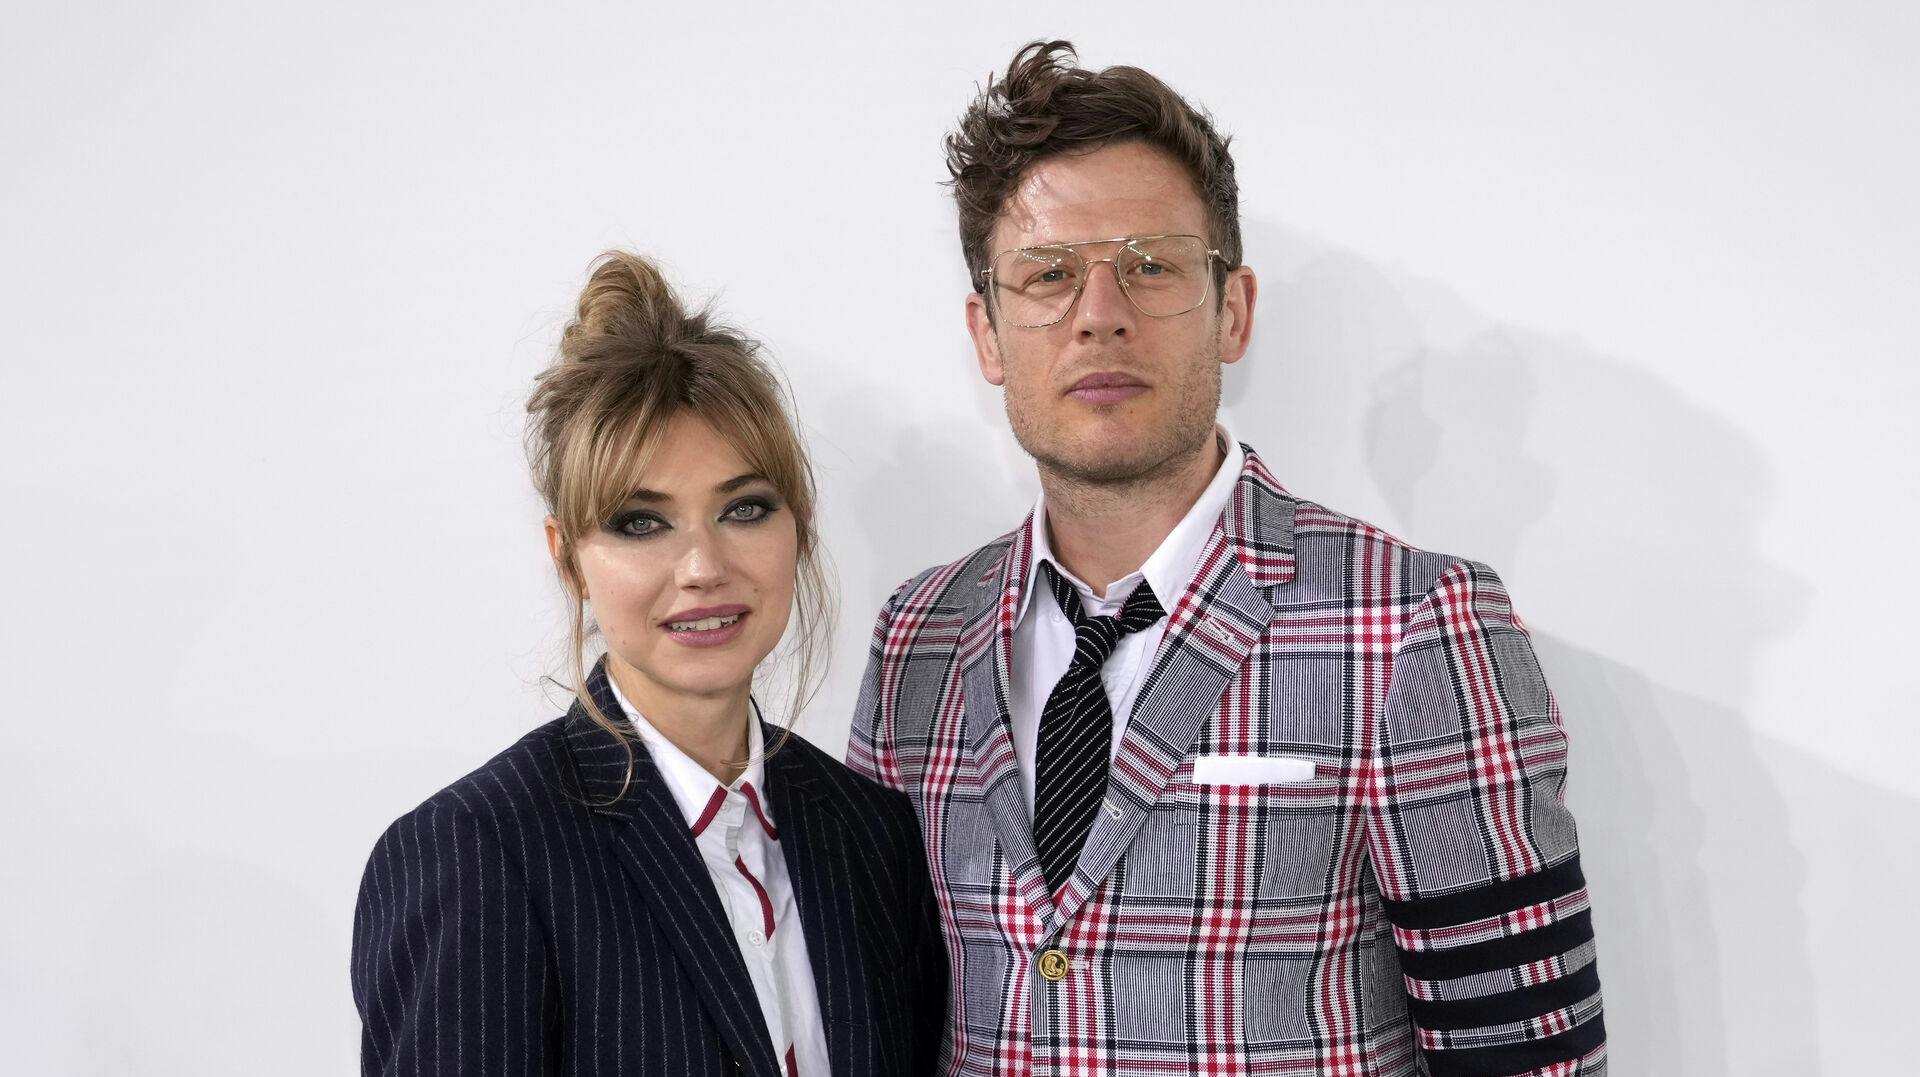 Imogen Poots and James Norton attend the Thom Browne Fall 2022 fashion show at the Javits Center on Friday, April. 29, 2022, in New York. (Photo by Charles Sykes/Invision/AP)